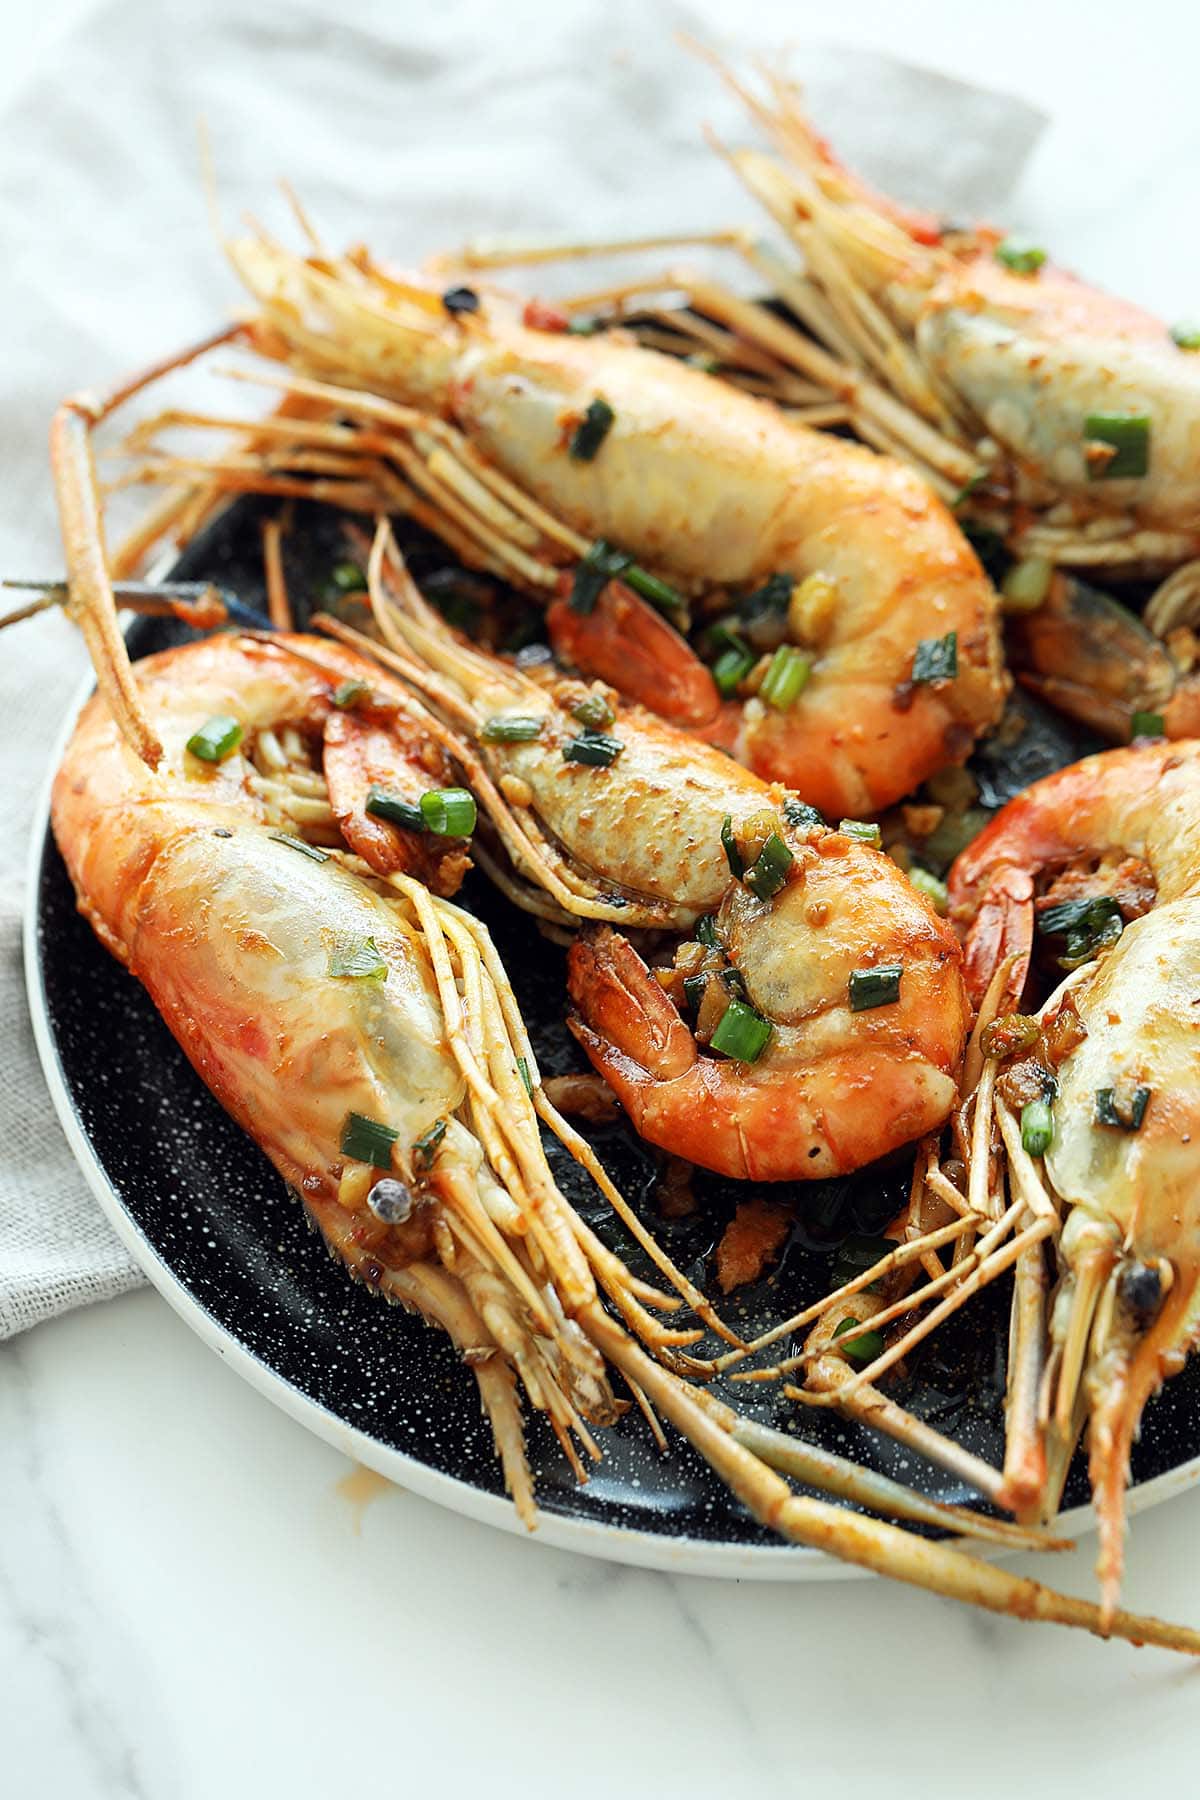 Pan Fried Prawns served on a plate.